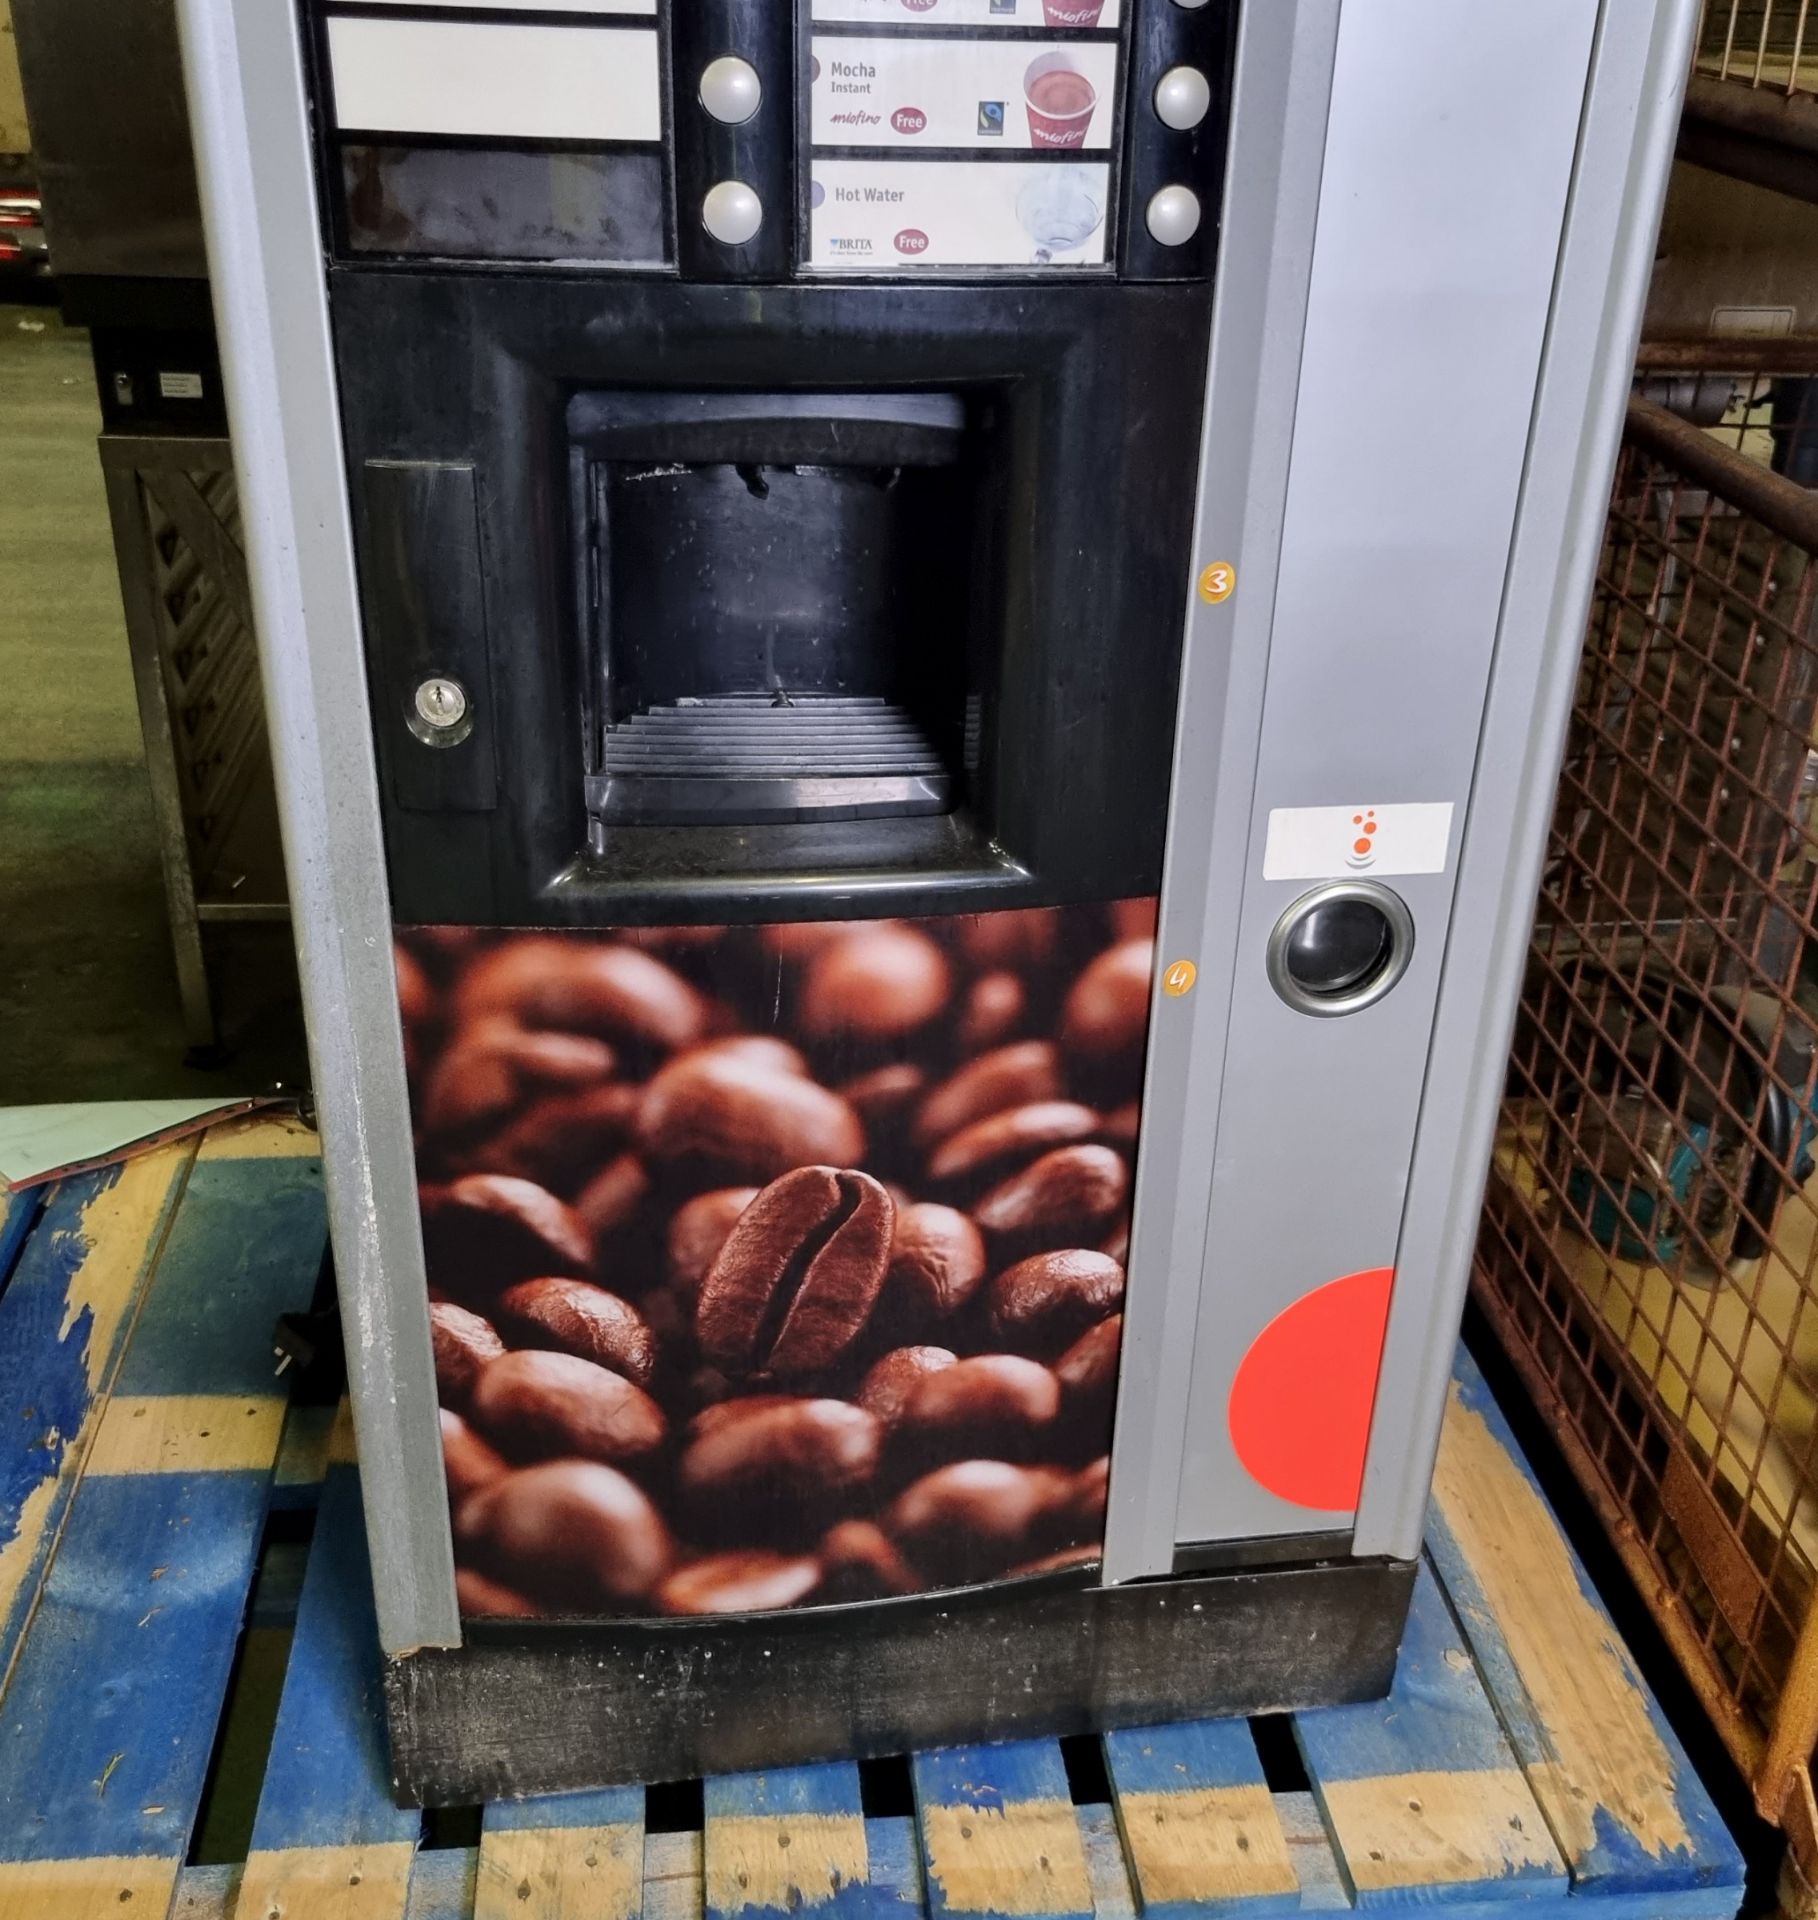 Miofino 960406 Selecta drinks vending machine - coin operated - 240V 50Hz - L 650 x W 730 x H 1830mm - Image 4 of 4